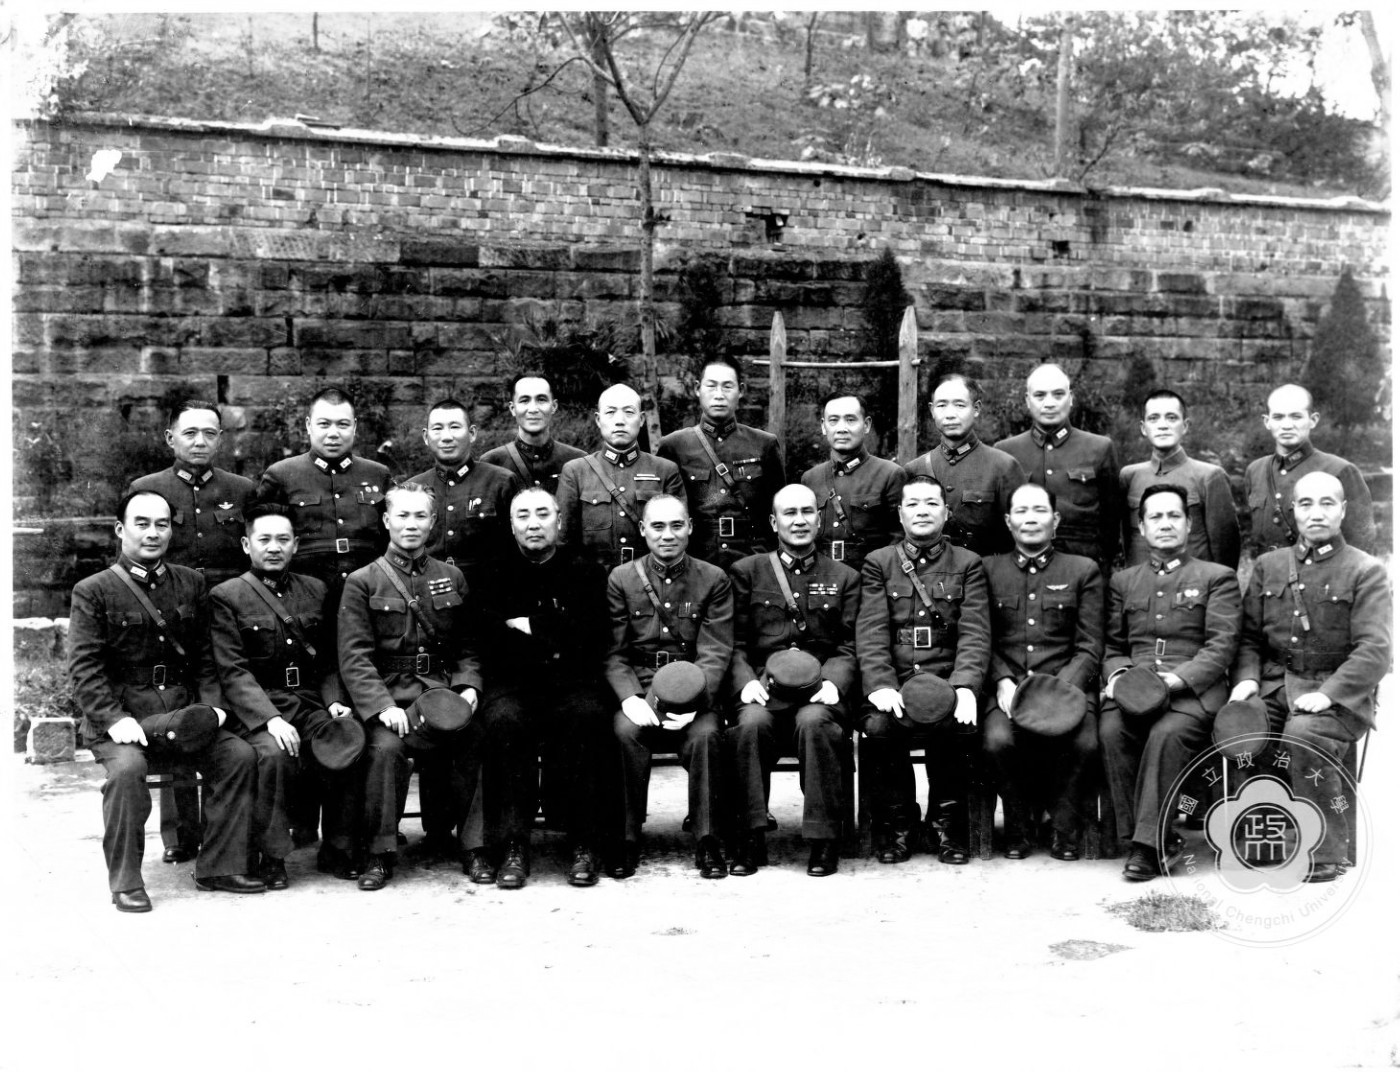 Group portrait of Chinese generals after a conference, Chongqing, China, 1943; note Hu Zongnan (first row, first from left), Chen Cheng (first row, third from left), Gu Zhutong (first row, fifth from left), Bai Chongxi (first row, fifth from right), Huang Zhenqiu (first row, third from right), and Yu Jishi (rear row, first from right)